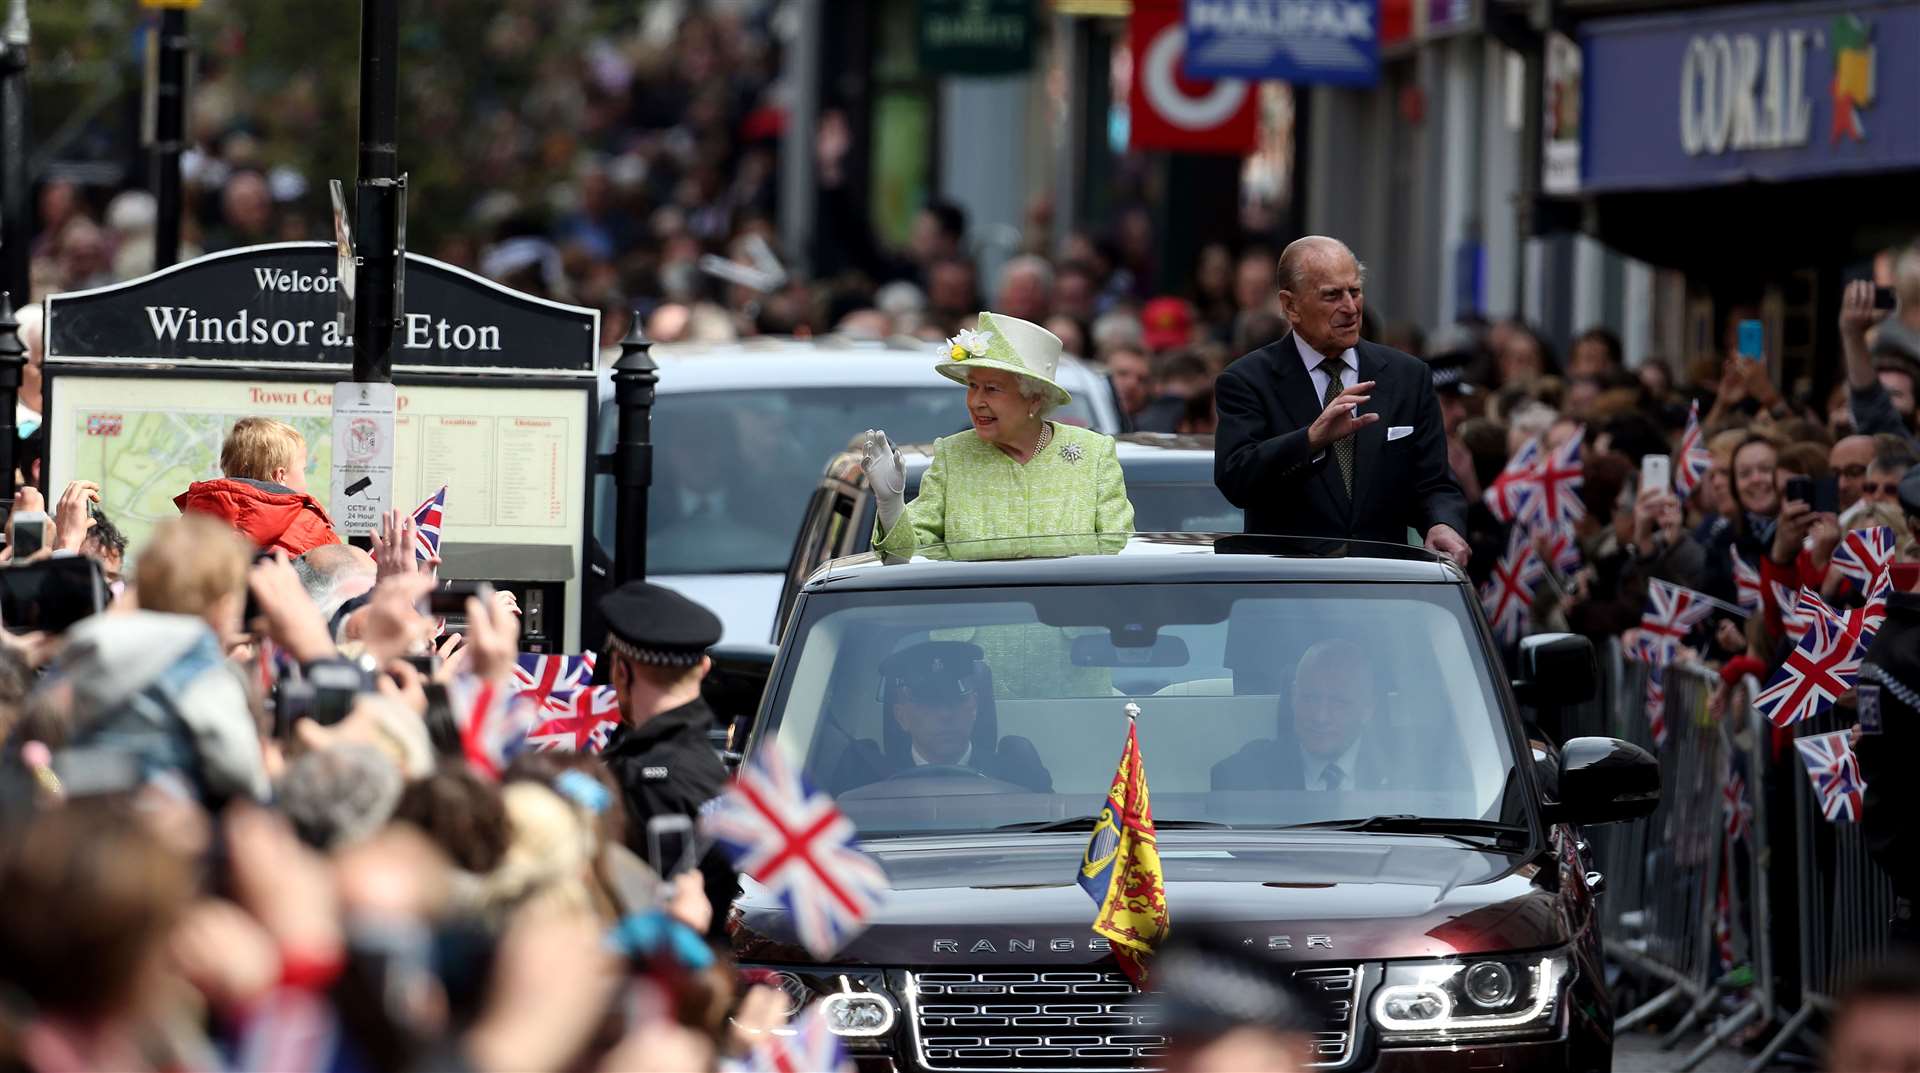 The Queen and Philip ride in an open-top Range Rover in Windsor to mark the monarch’s 90th birthday (Steve Parsons/PA)